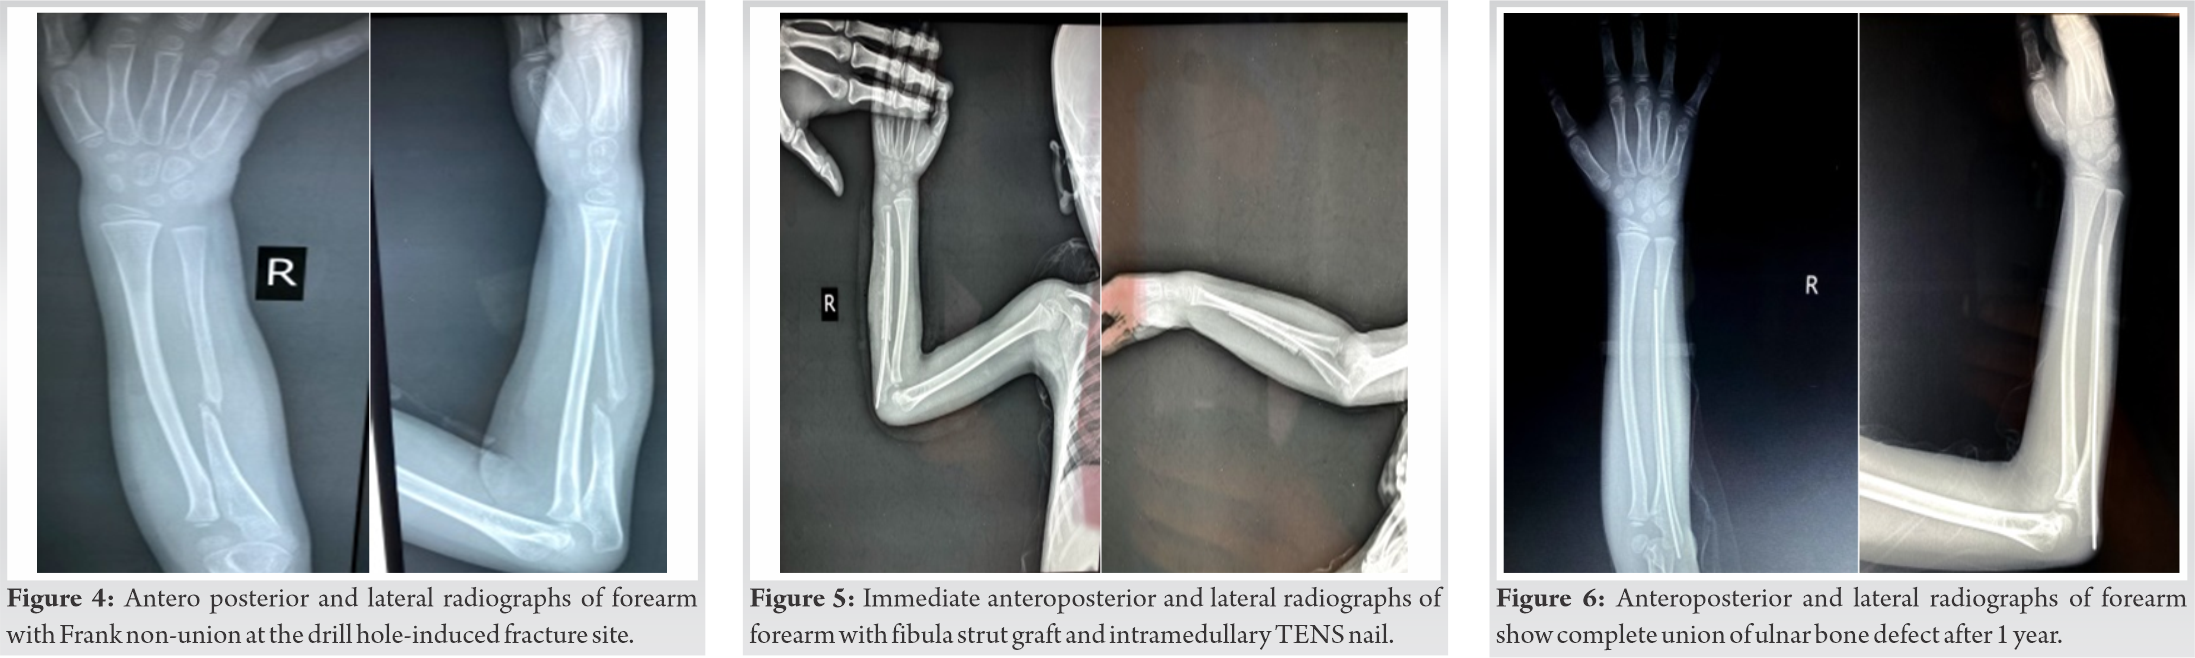 FIg 4 5 6 | Journal of Orthopaedic Case Reports